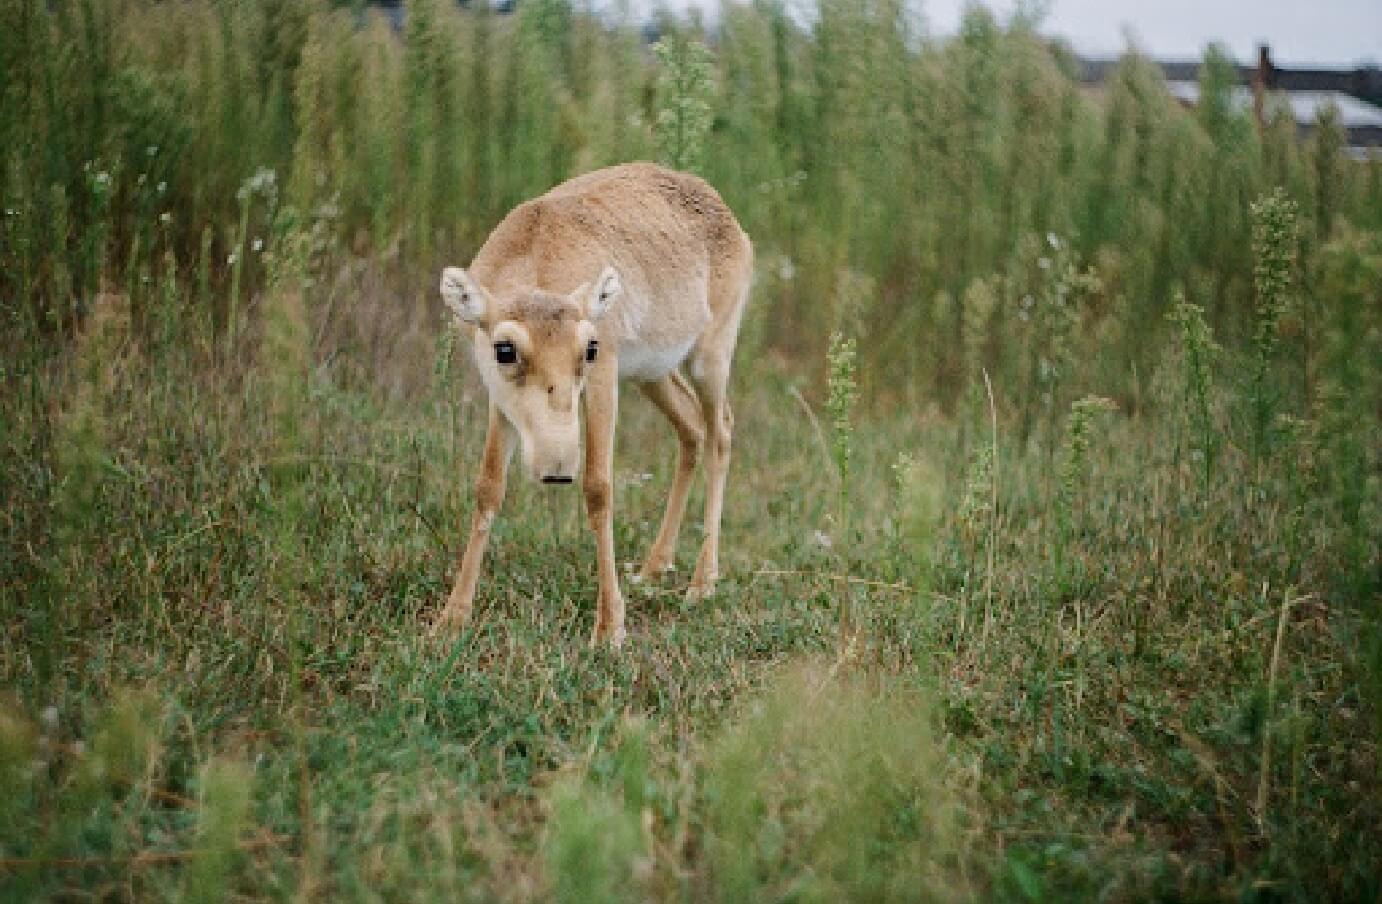 Photo taken from afar of a saiga antelope in a tall grassy field